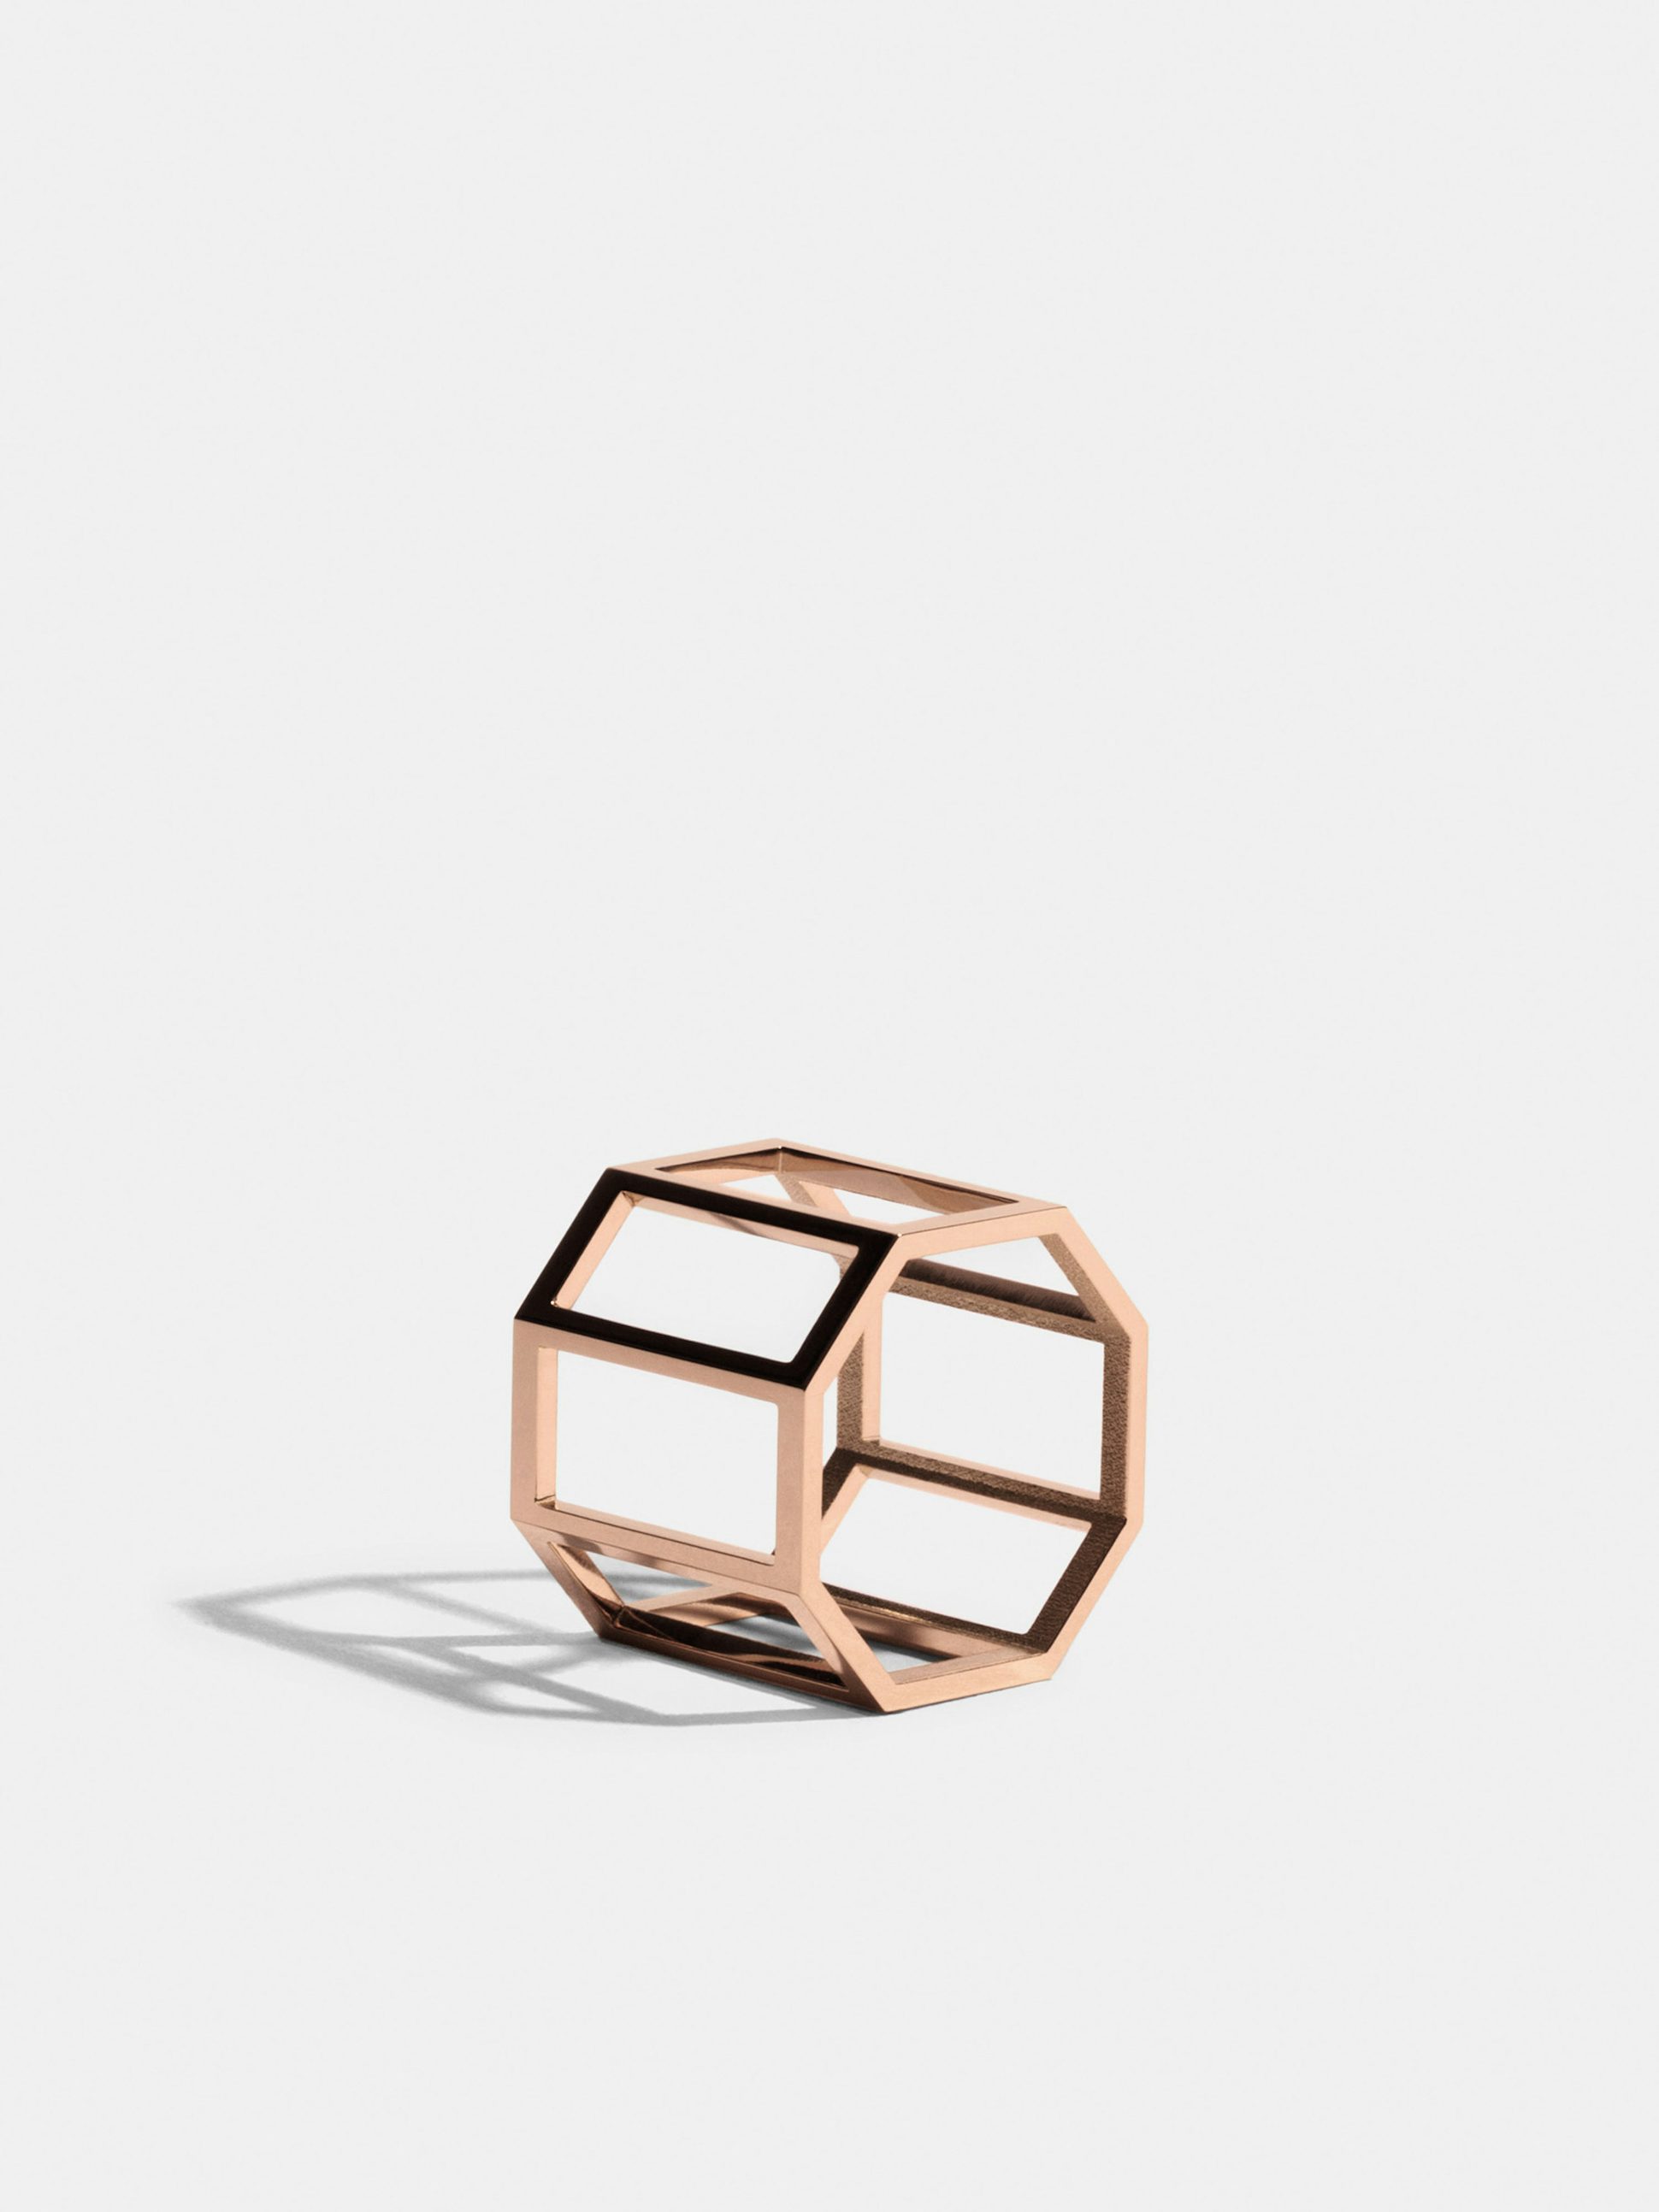 Octogone structured ring in 18k Fairmined ethical rose gold (17mm)